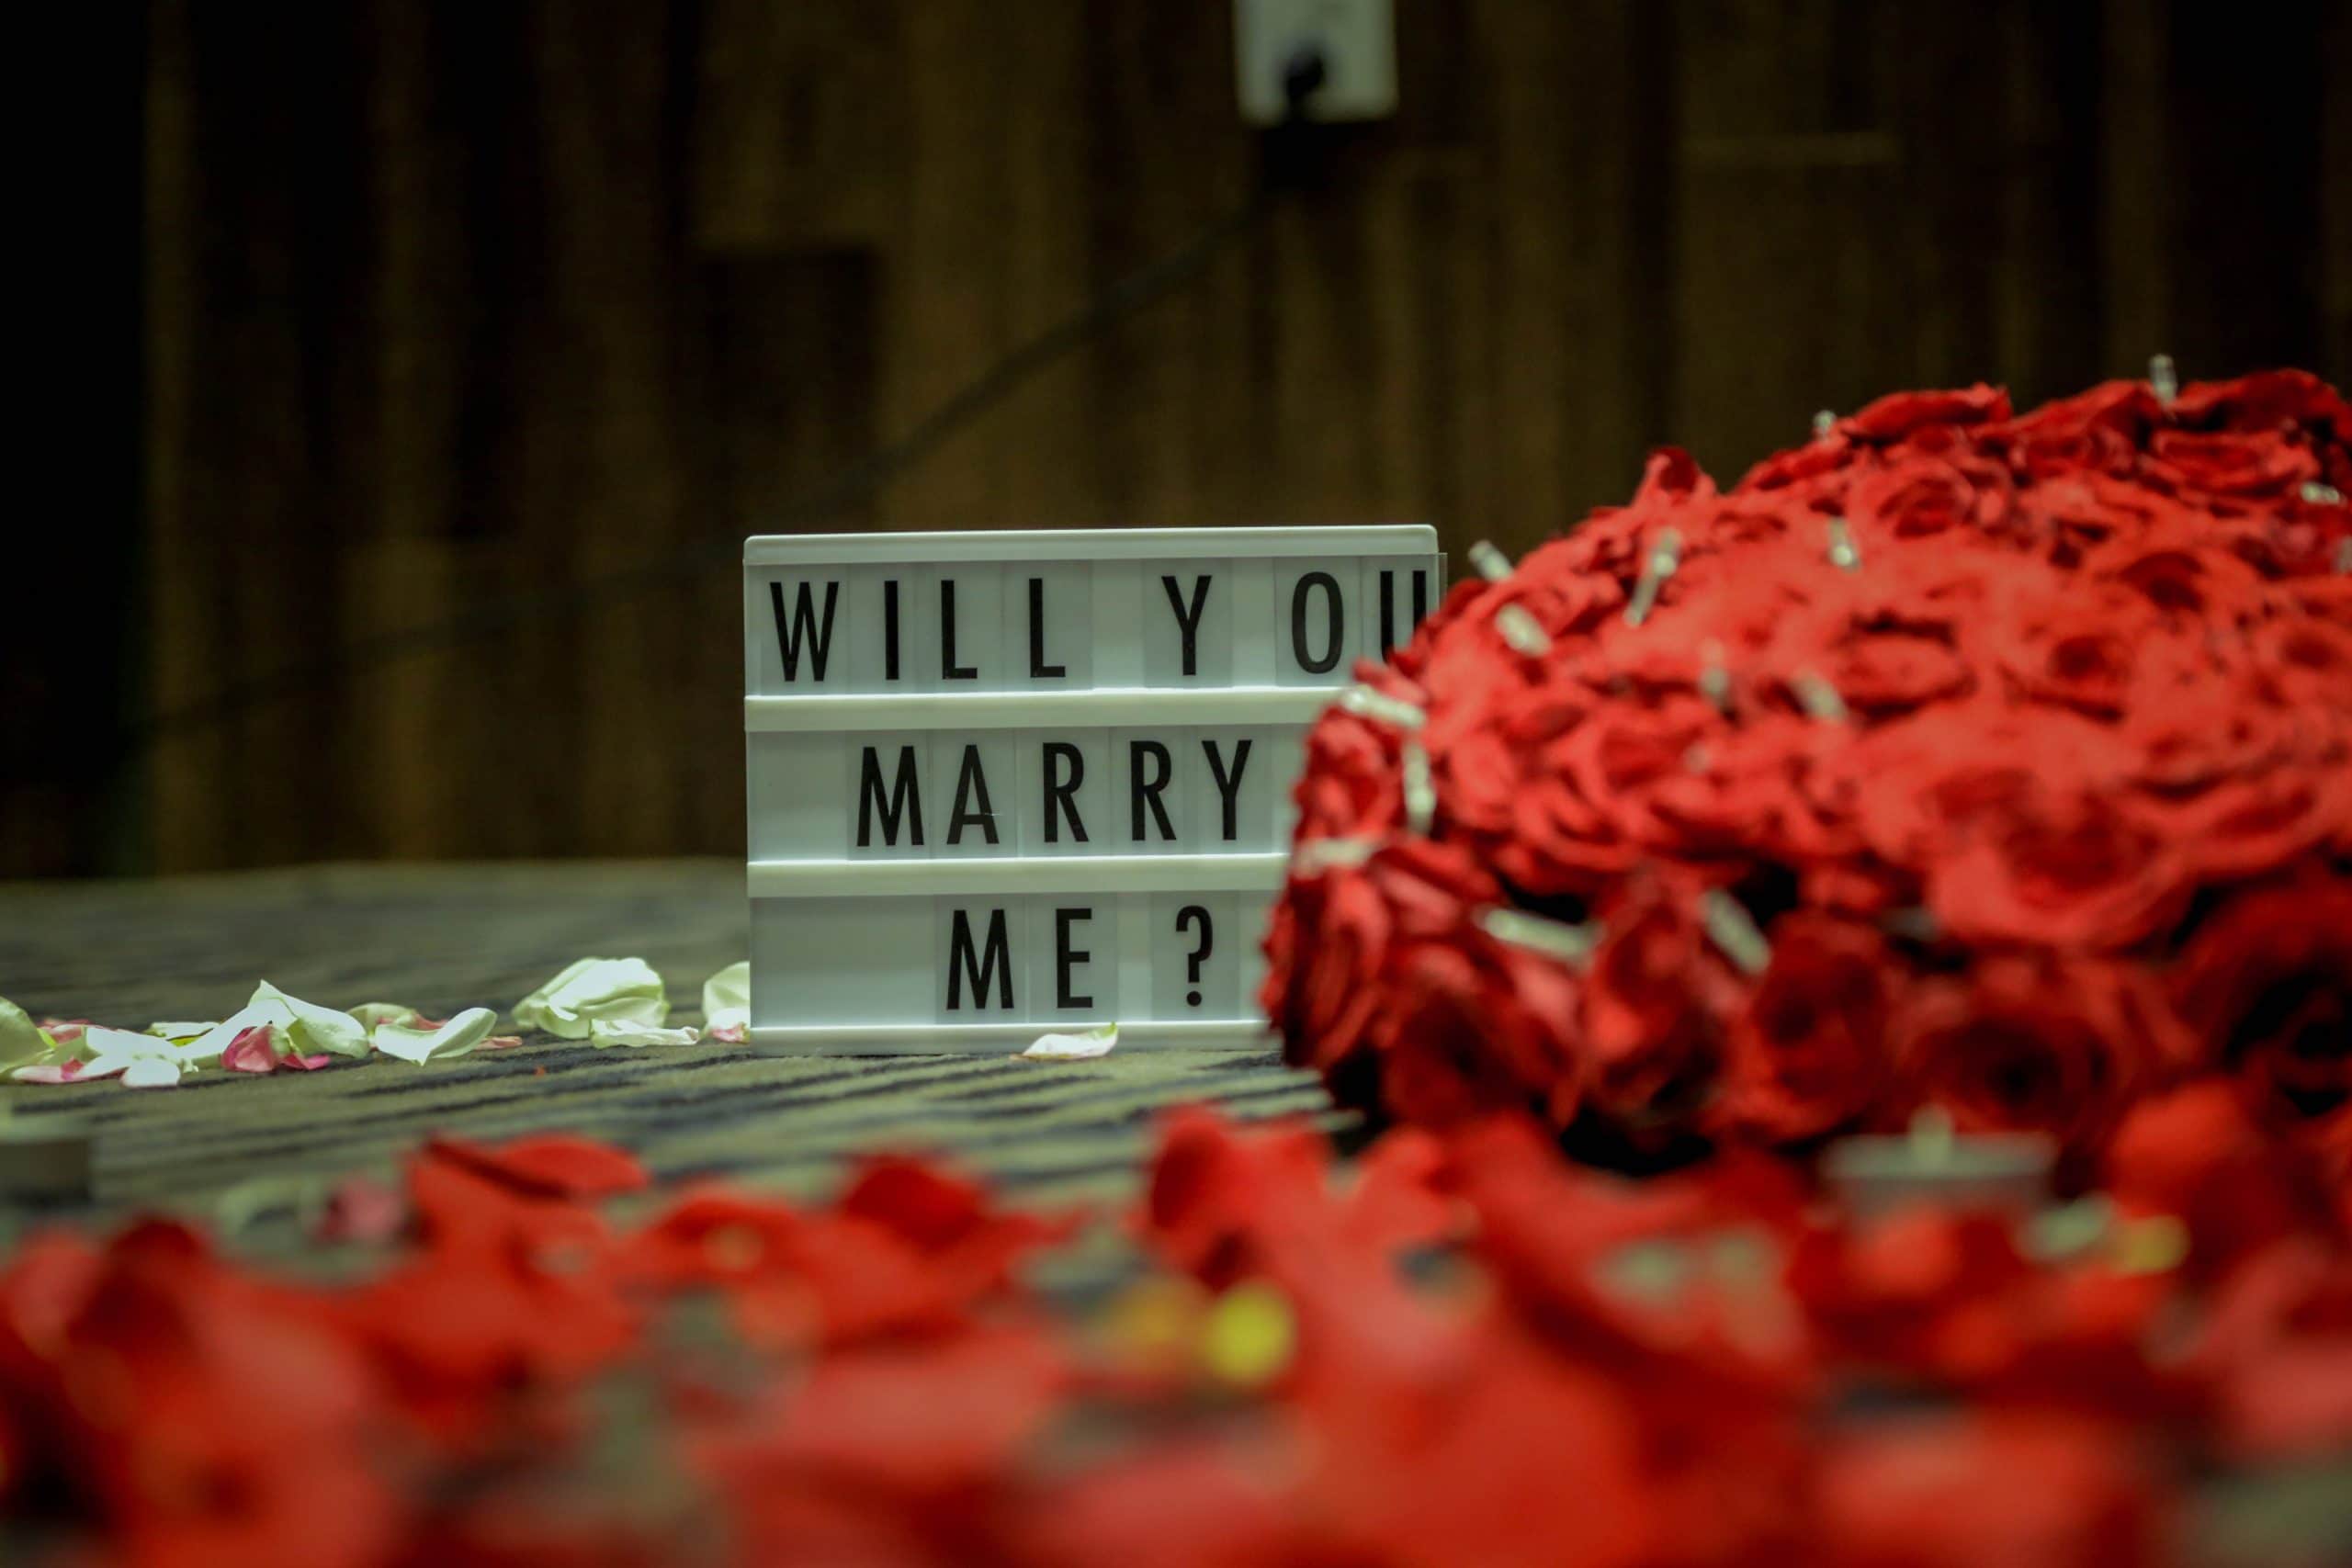 will you marry me?